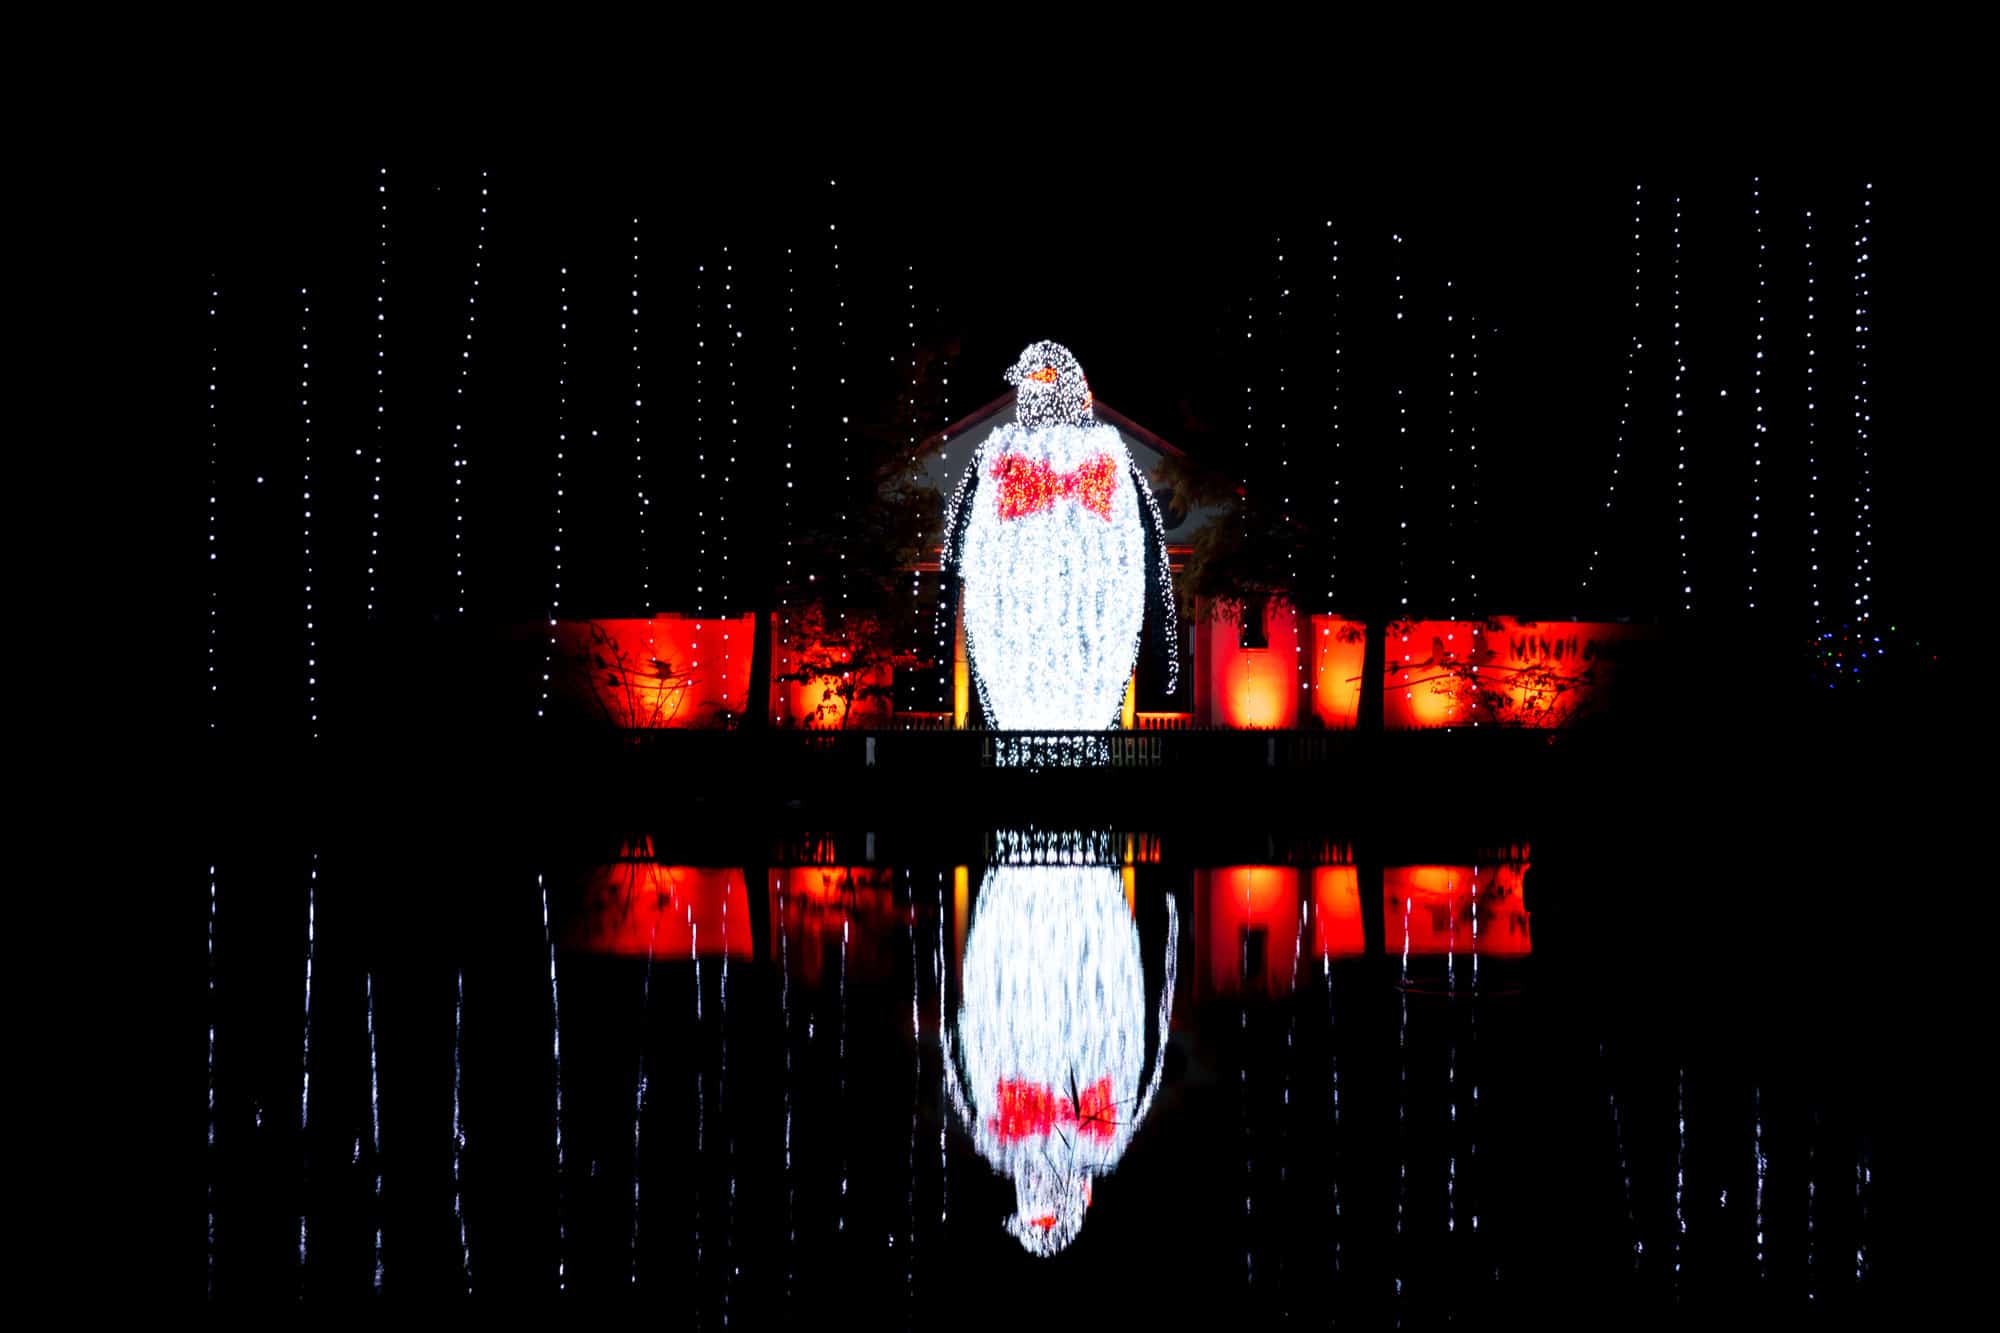 Large penguin sculpture covered in lights, which is reflected in a pond